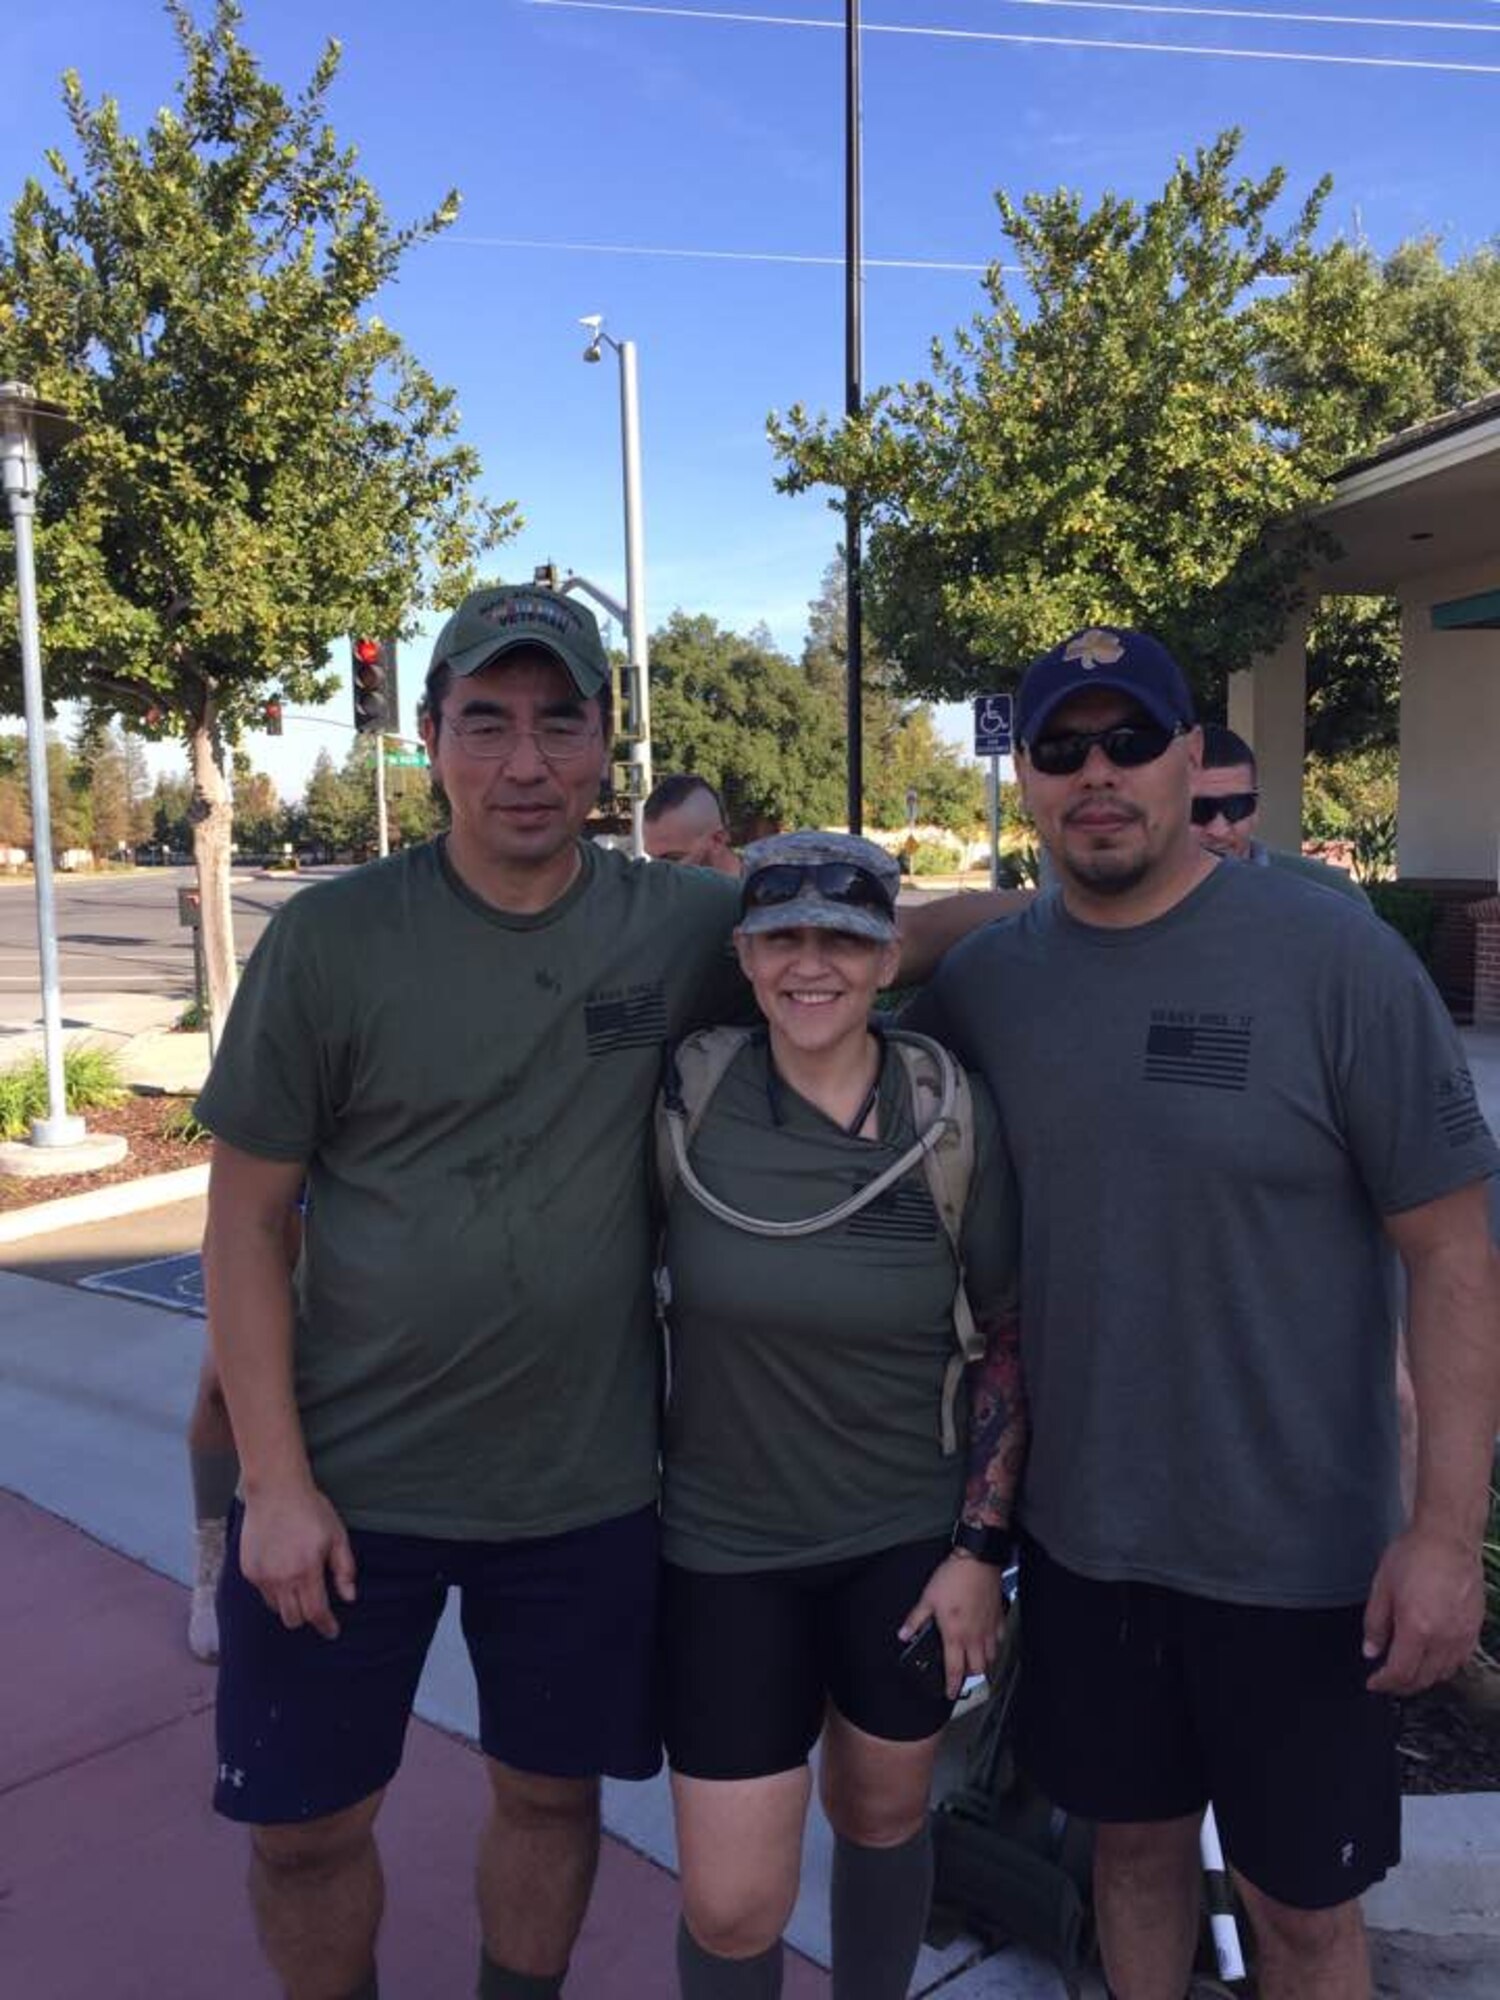 Lt. Col. Susumu Uchiyama (left) poses with two veterans during the Silkies Hike Oct. 21 in Bakersfield, California. Uchiyama is the 940th Mission Support Group deputy commander at Beale Air Force Base, California. (Courtesy photo)